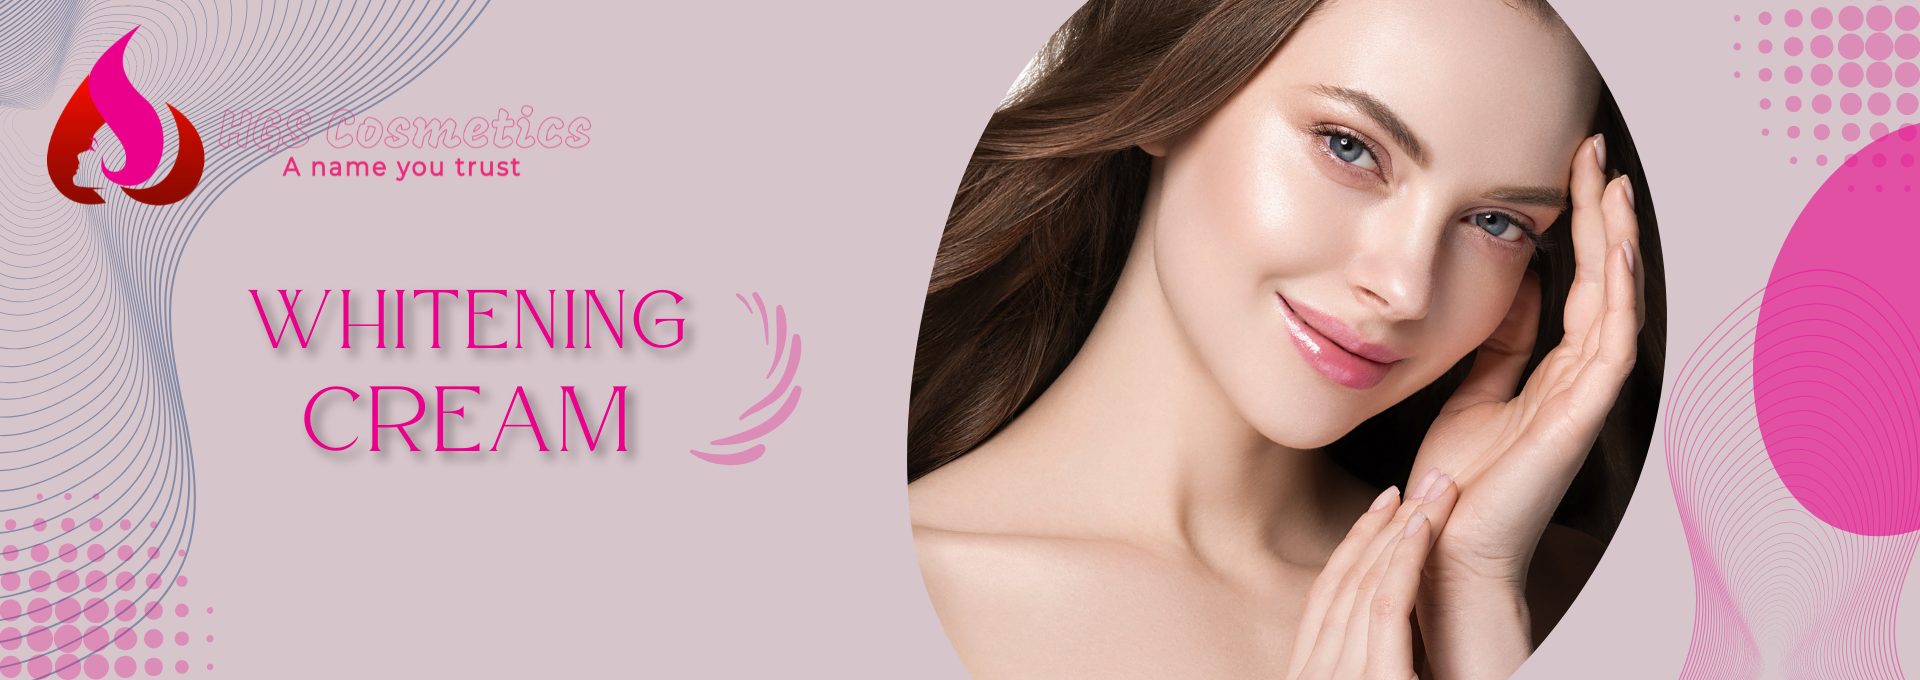 Shop Best Whitening Cream products Online @ HGS Cosmetics